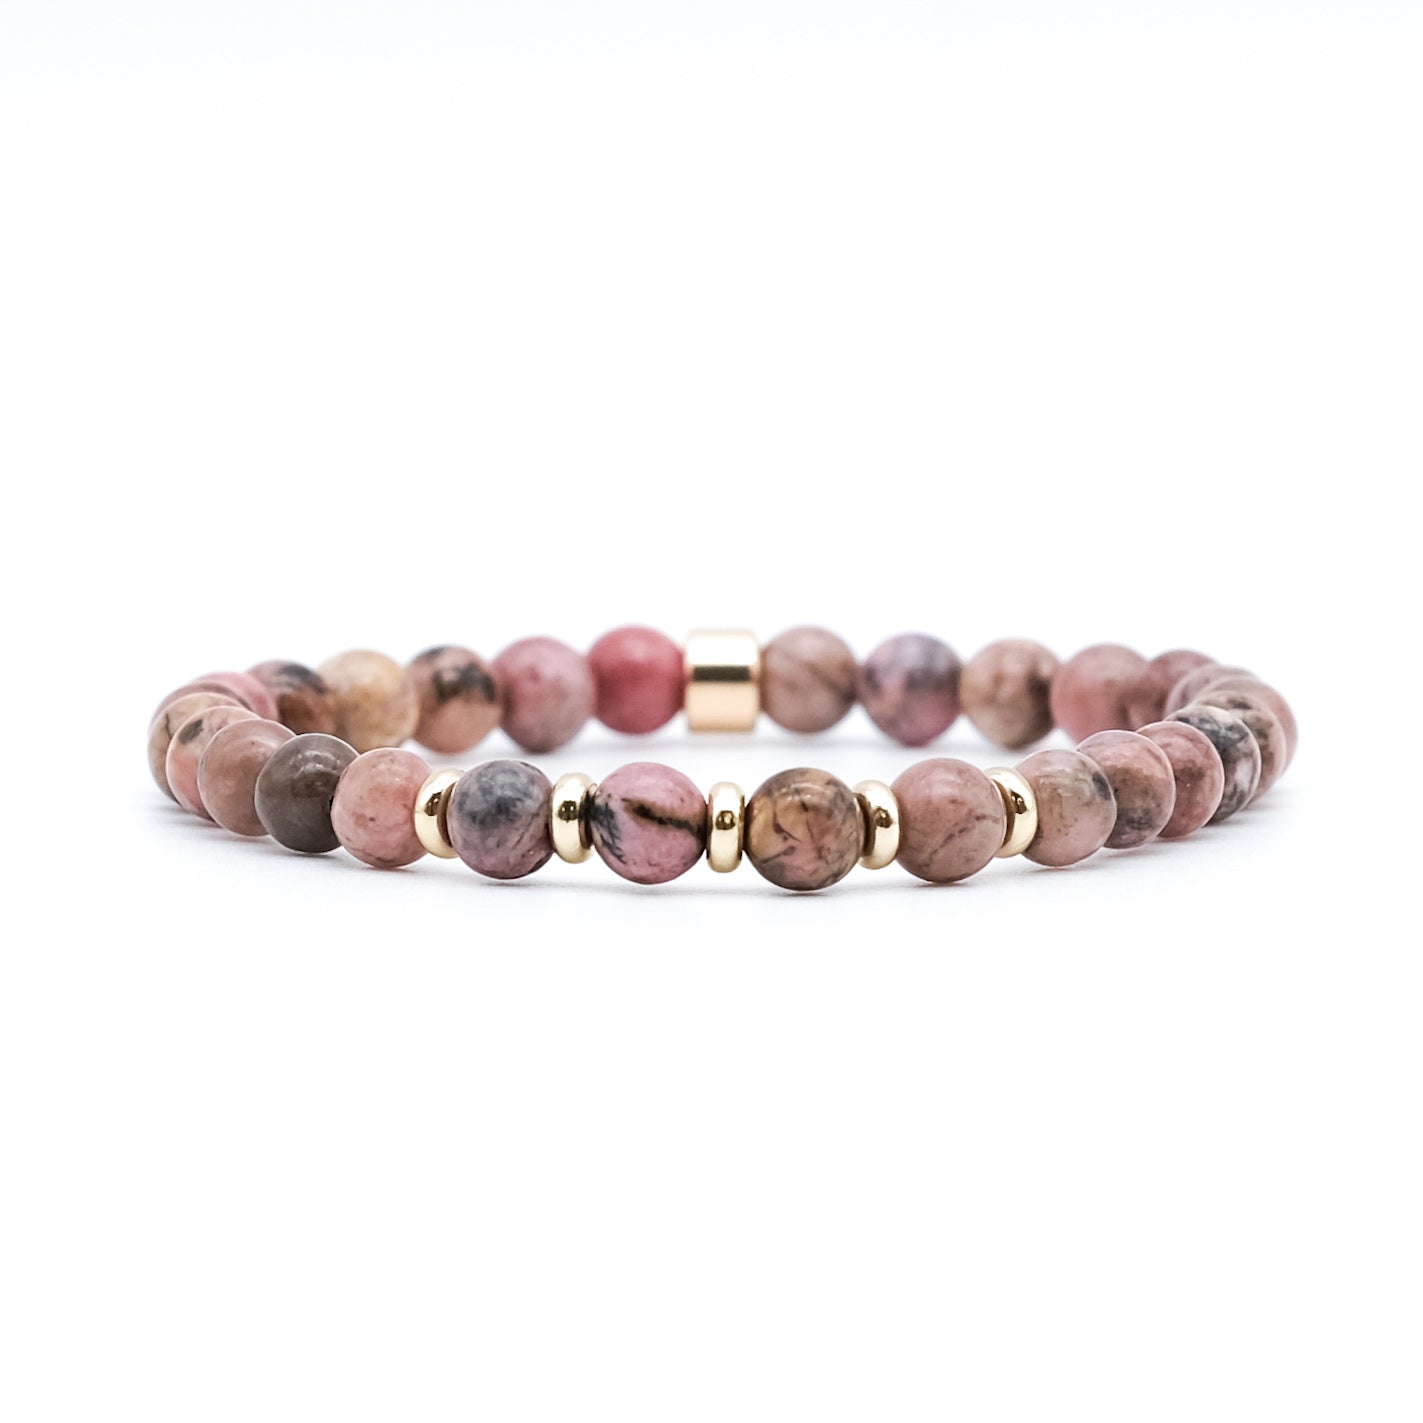 6mm Rhodonite gemstone bracelet with 18ct gold plated accessories